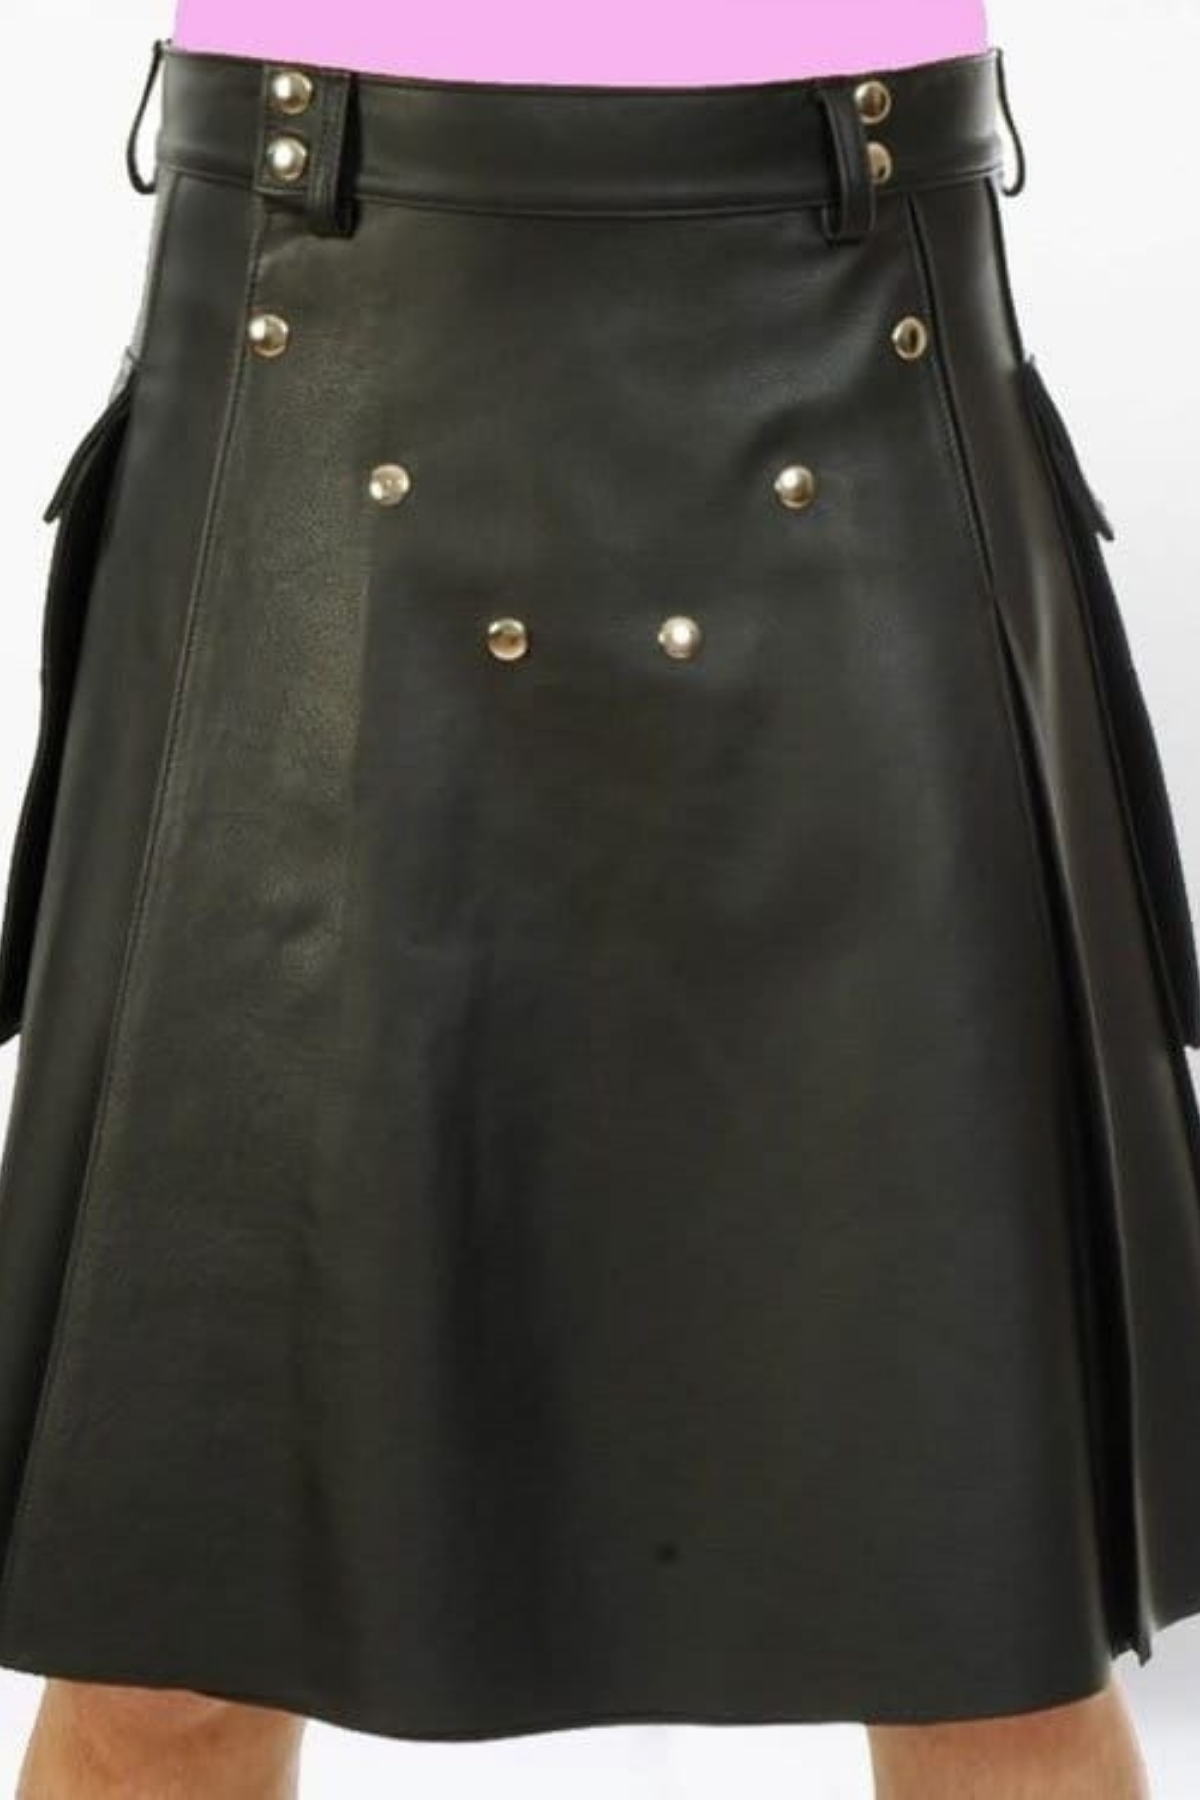 Clubwear Pleated Leather Kilt - Front side view